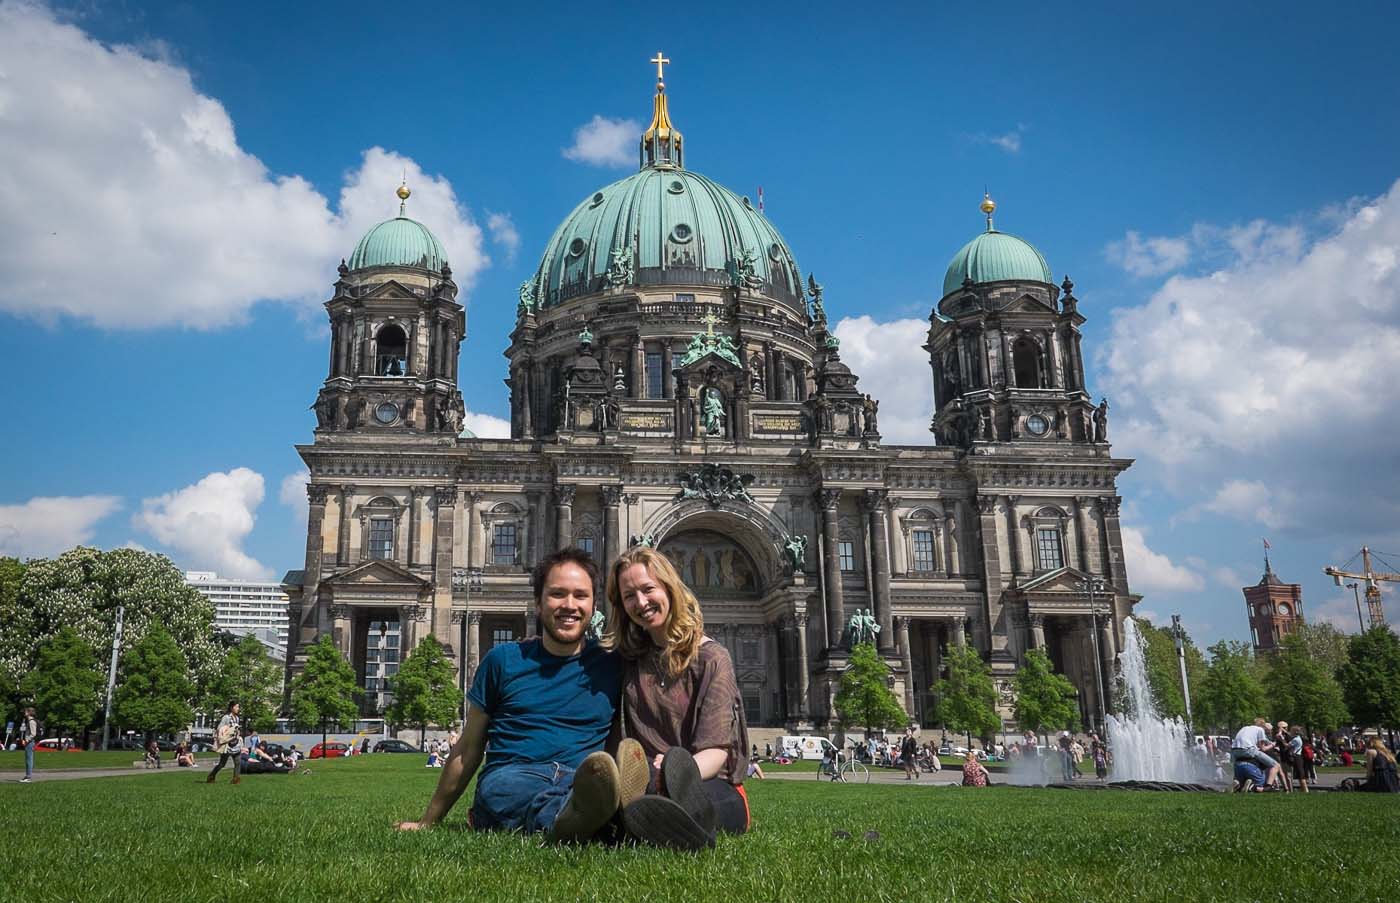 Diana and Ian at Berliner Dom, Berlin, Germany